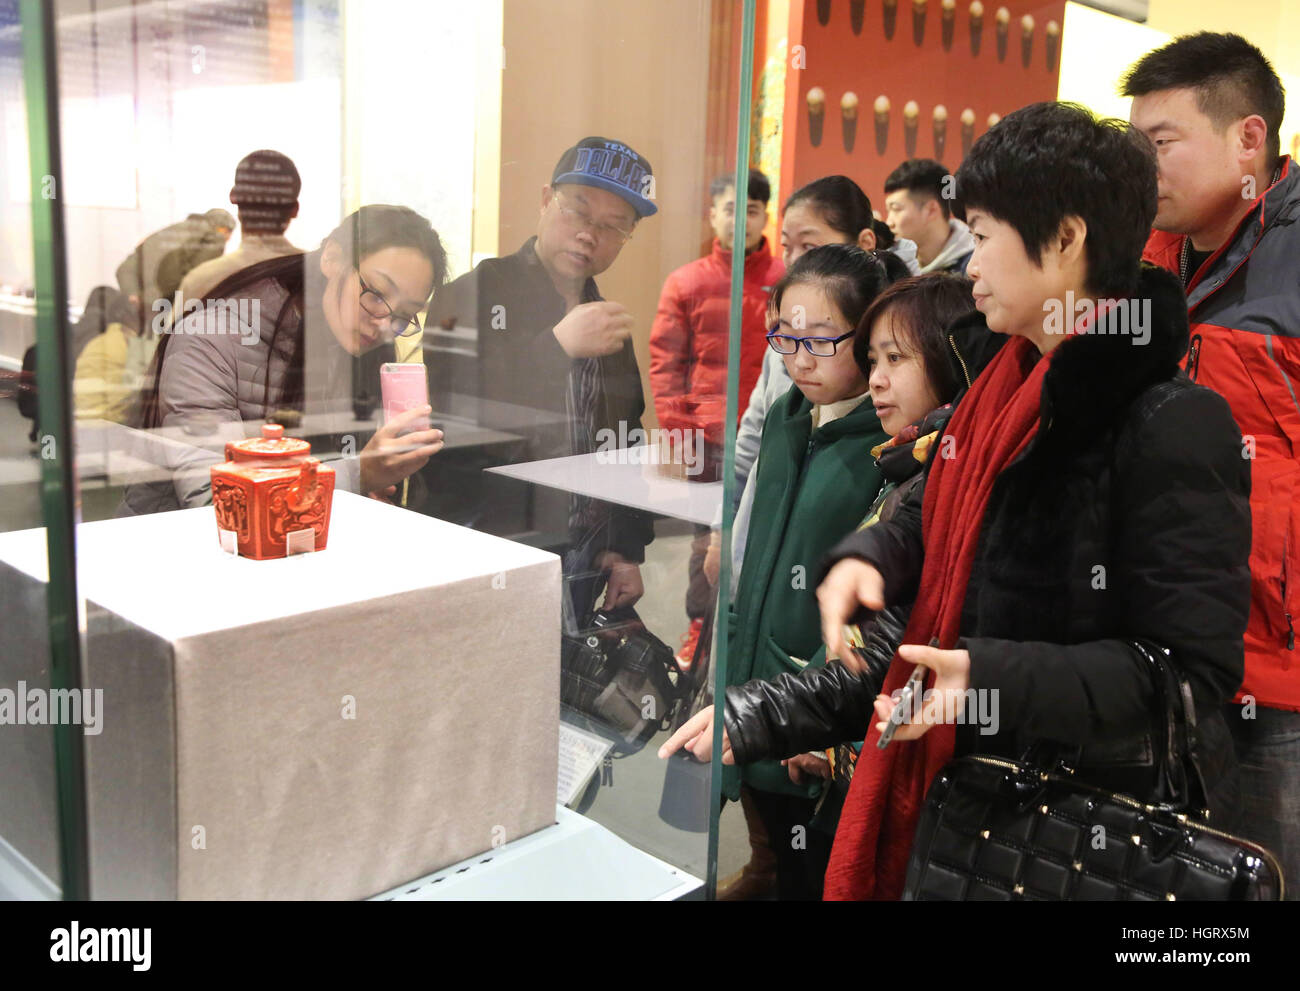 Beijing, China. 12th Jan, 2017. Visitors watch the exhibit during an exhibition of purple clay wares at newly-opened Yixing Museum in Yixing City, east China's Jiangsu Province. The three-month exhibition brought Yixing purple clay wares, which were collected by Beijing's Palace Museum, to their producing place Yixing. The new Yixing Museum with an area of 25,000 square meters opened on Thursday. © Ding Huanxin/Xinhua/Alamy Live News Stock Photo